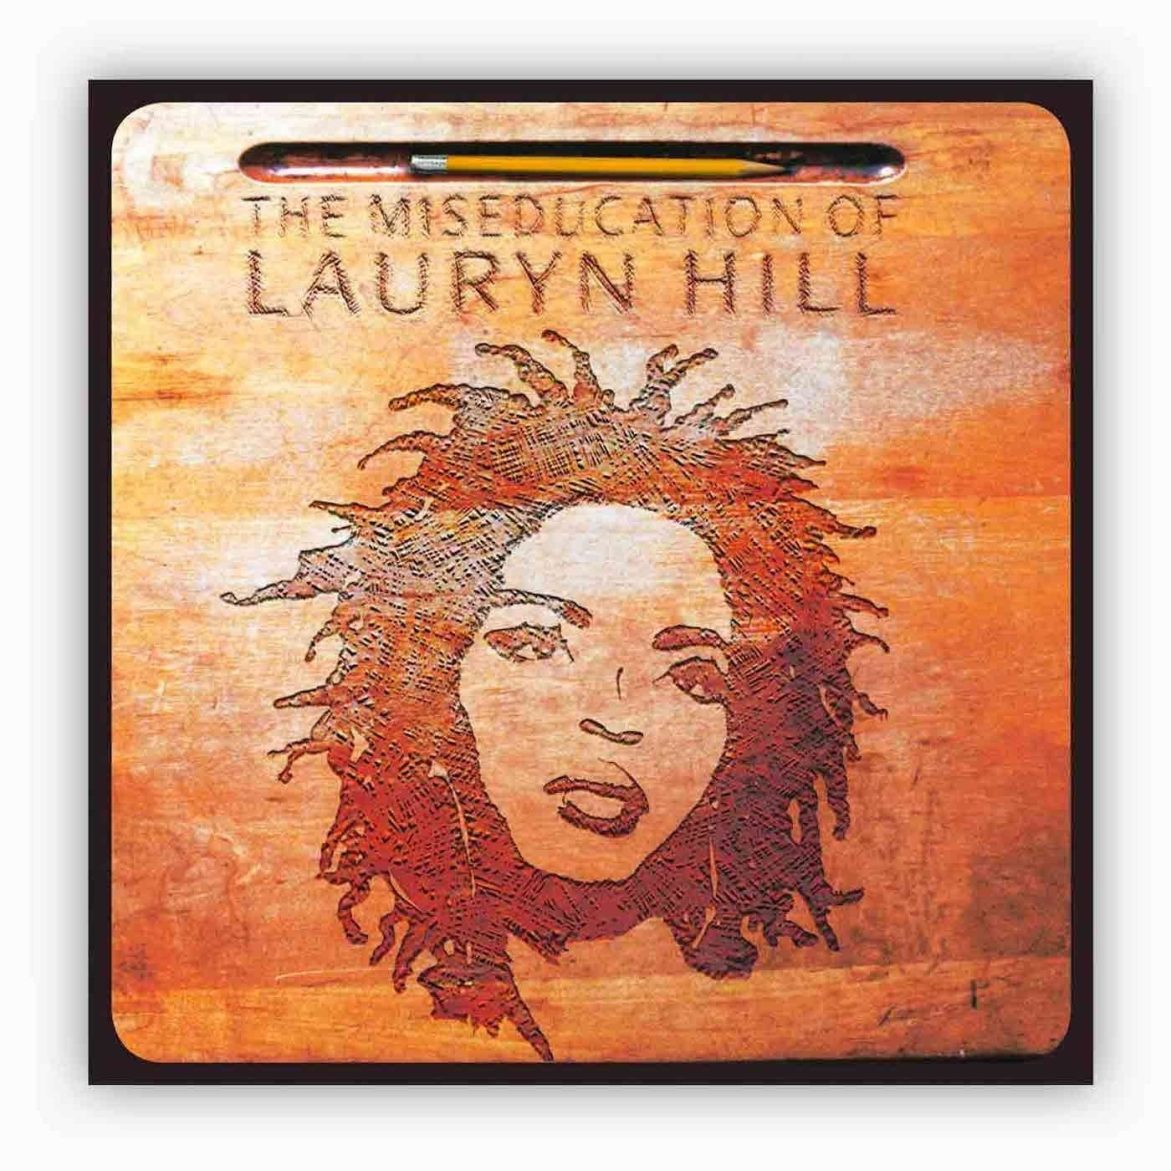 Black Podcasting - Lauryn Hill: The Miseducation of Lauryn Hill (1998). Beyond Our Wildest Dreams